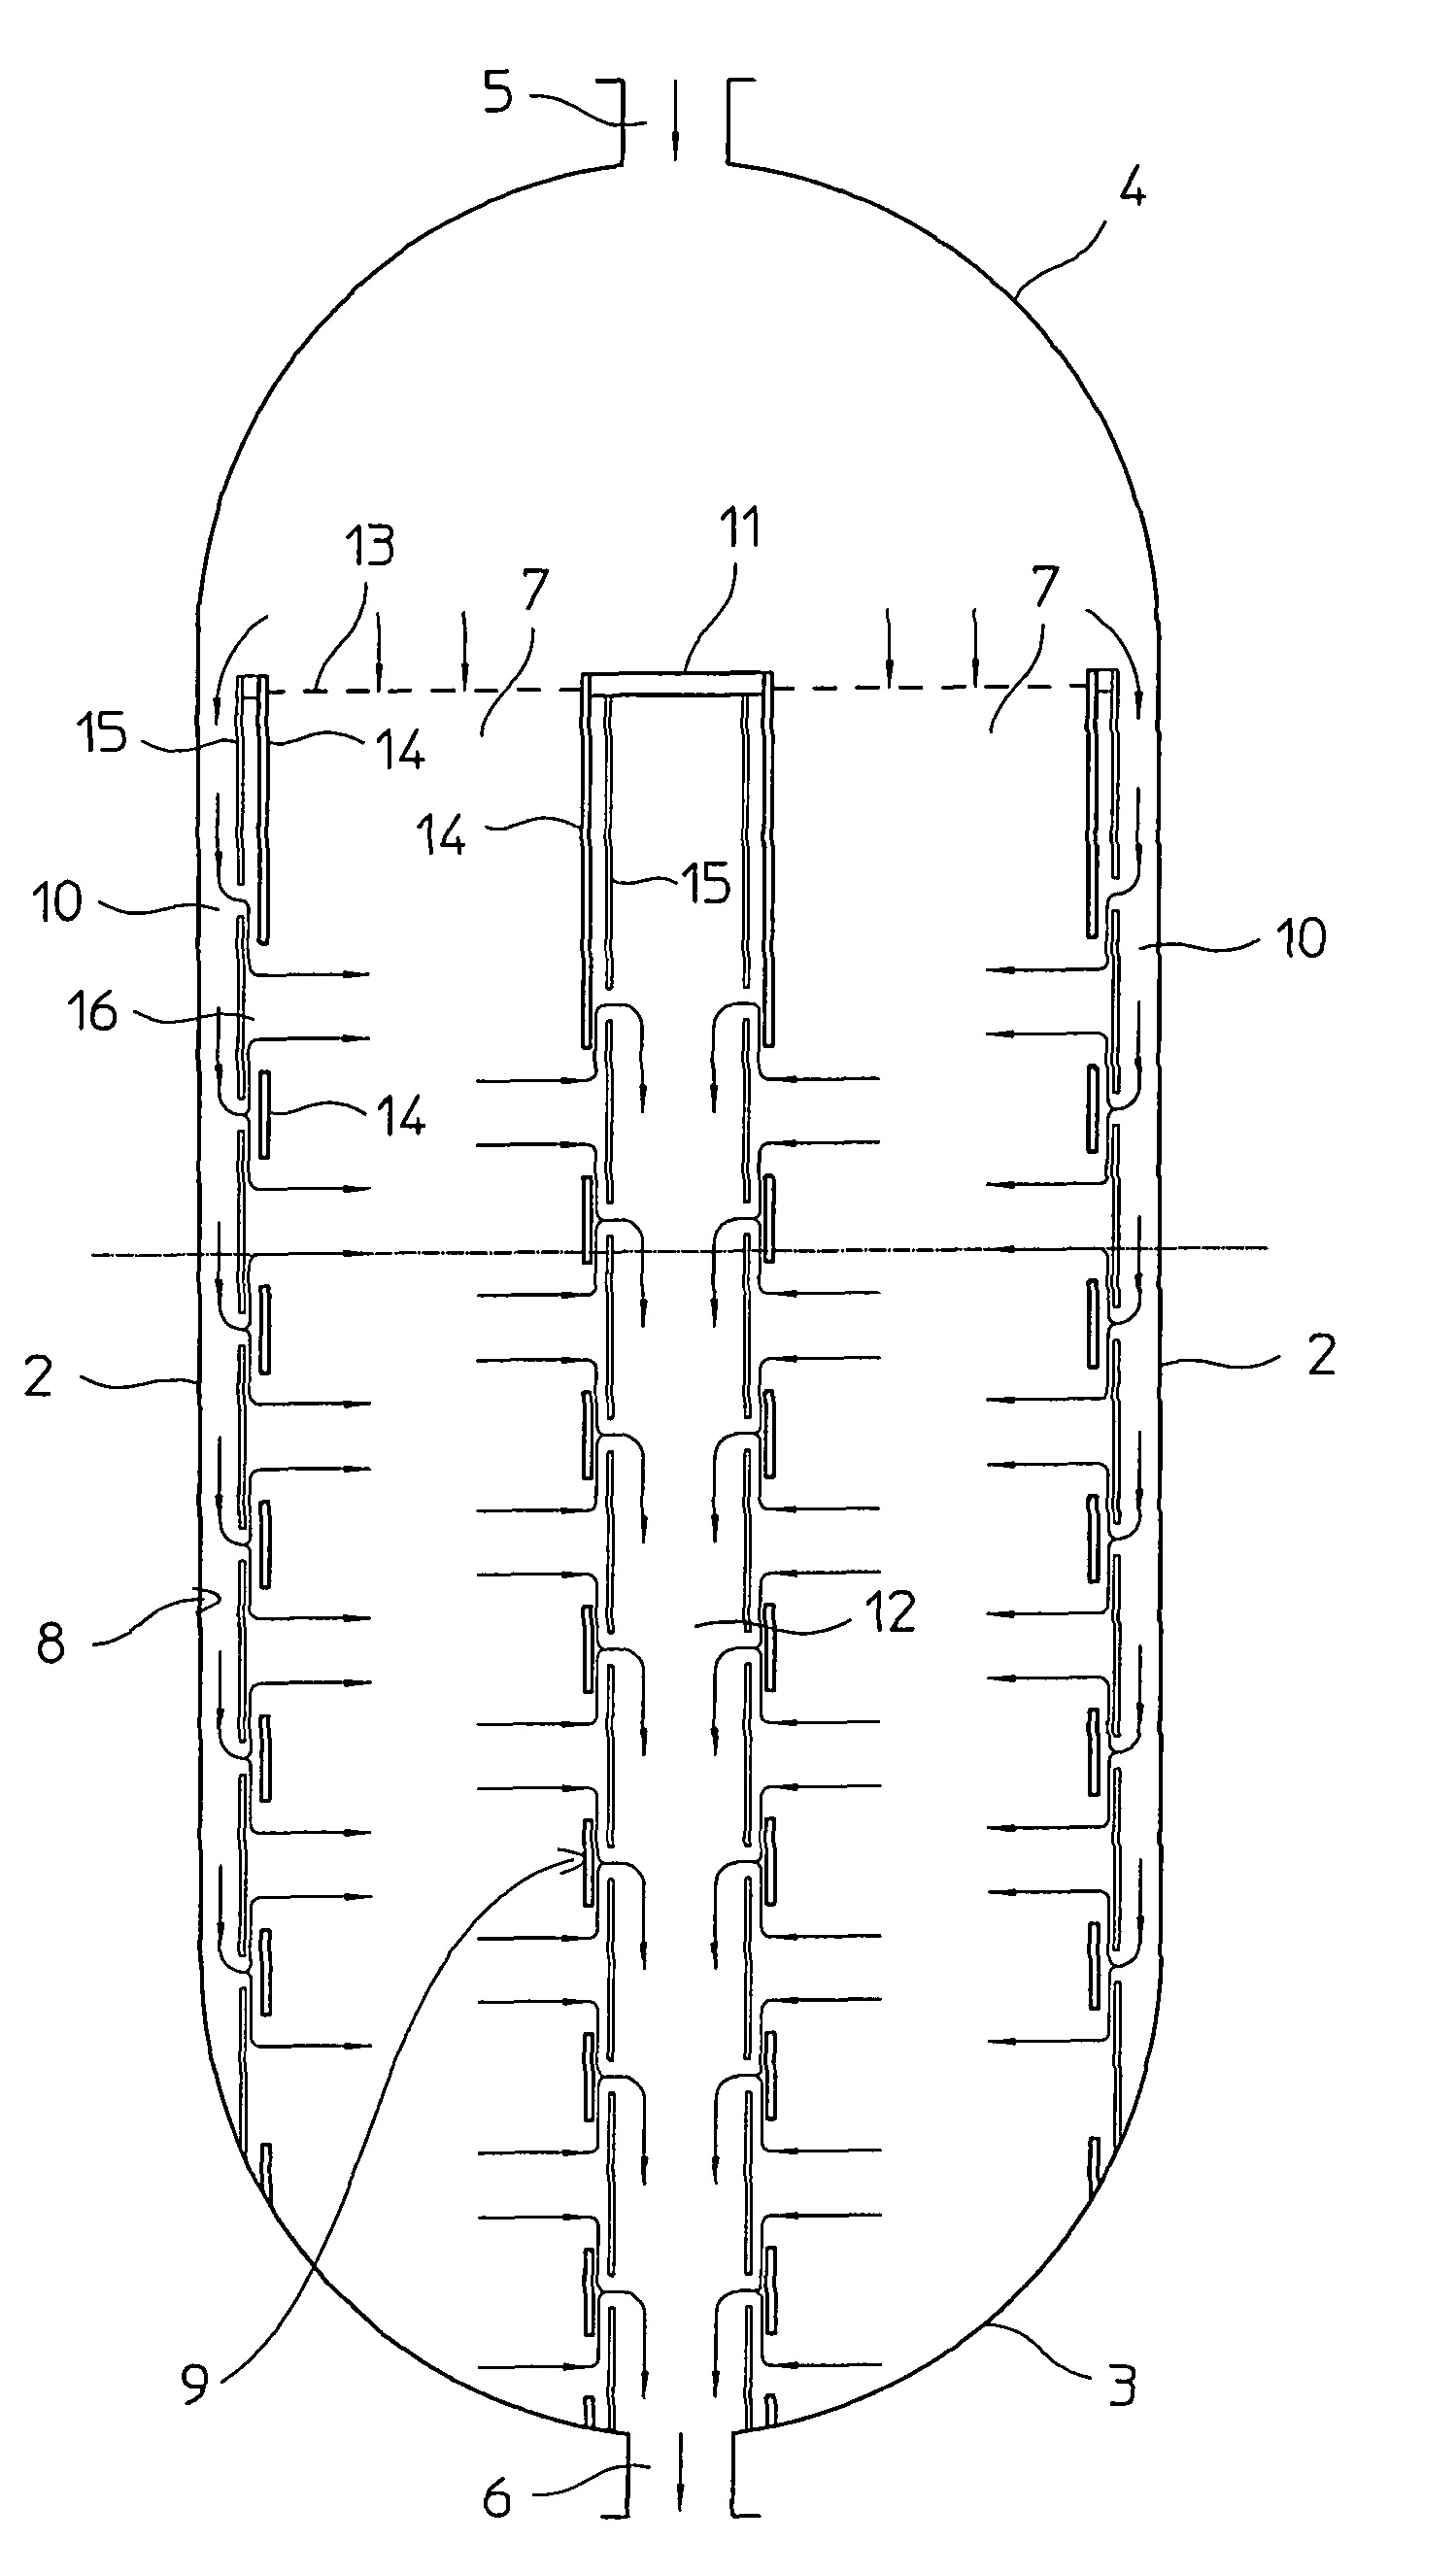 Wall system for catalytic beds of synthesis reactors